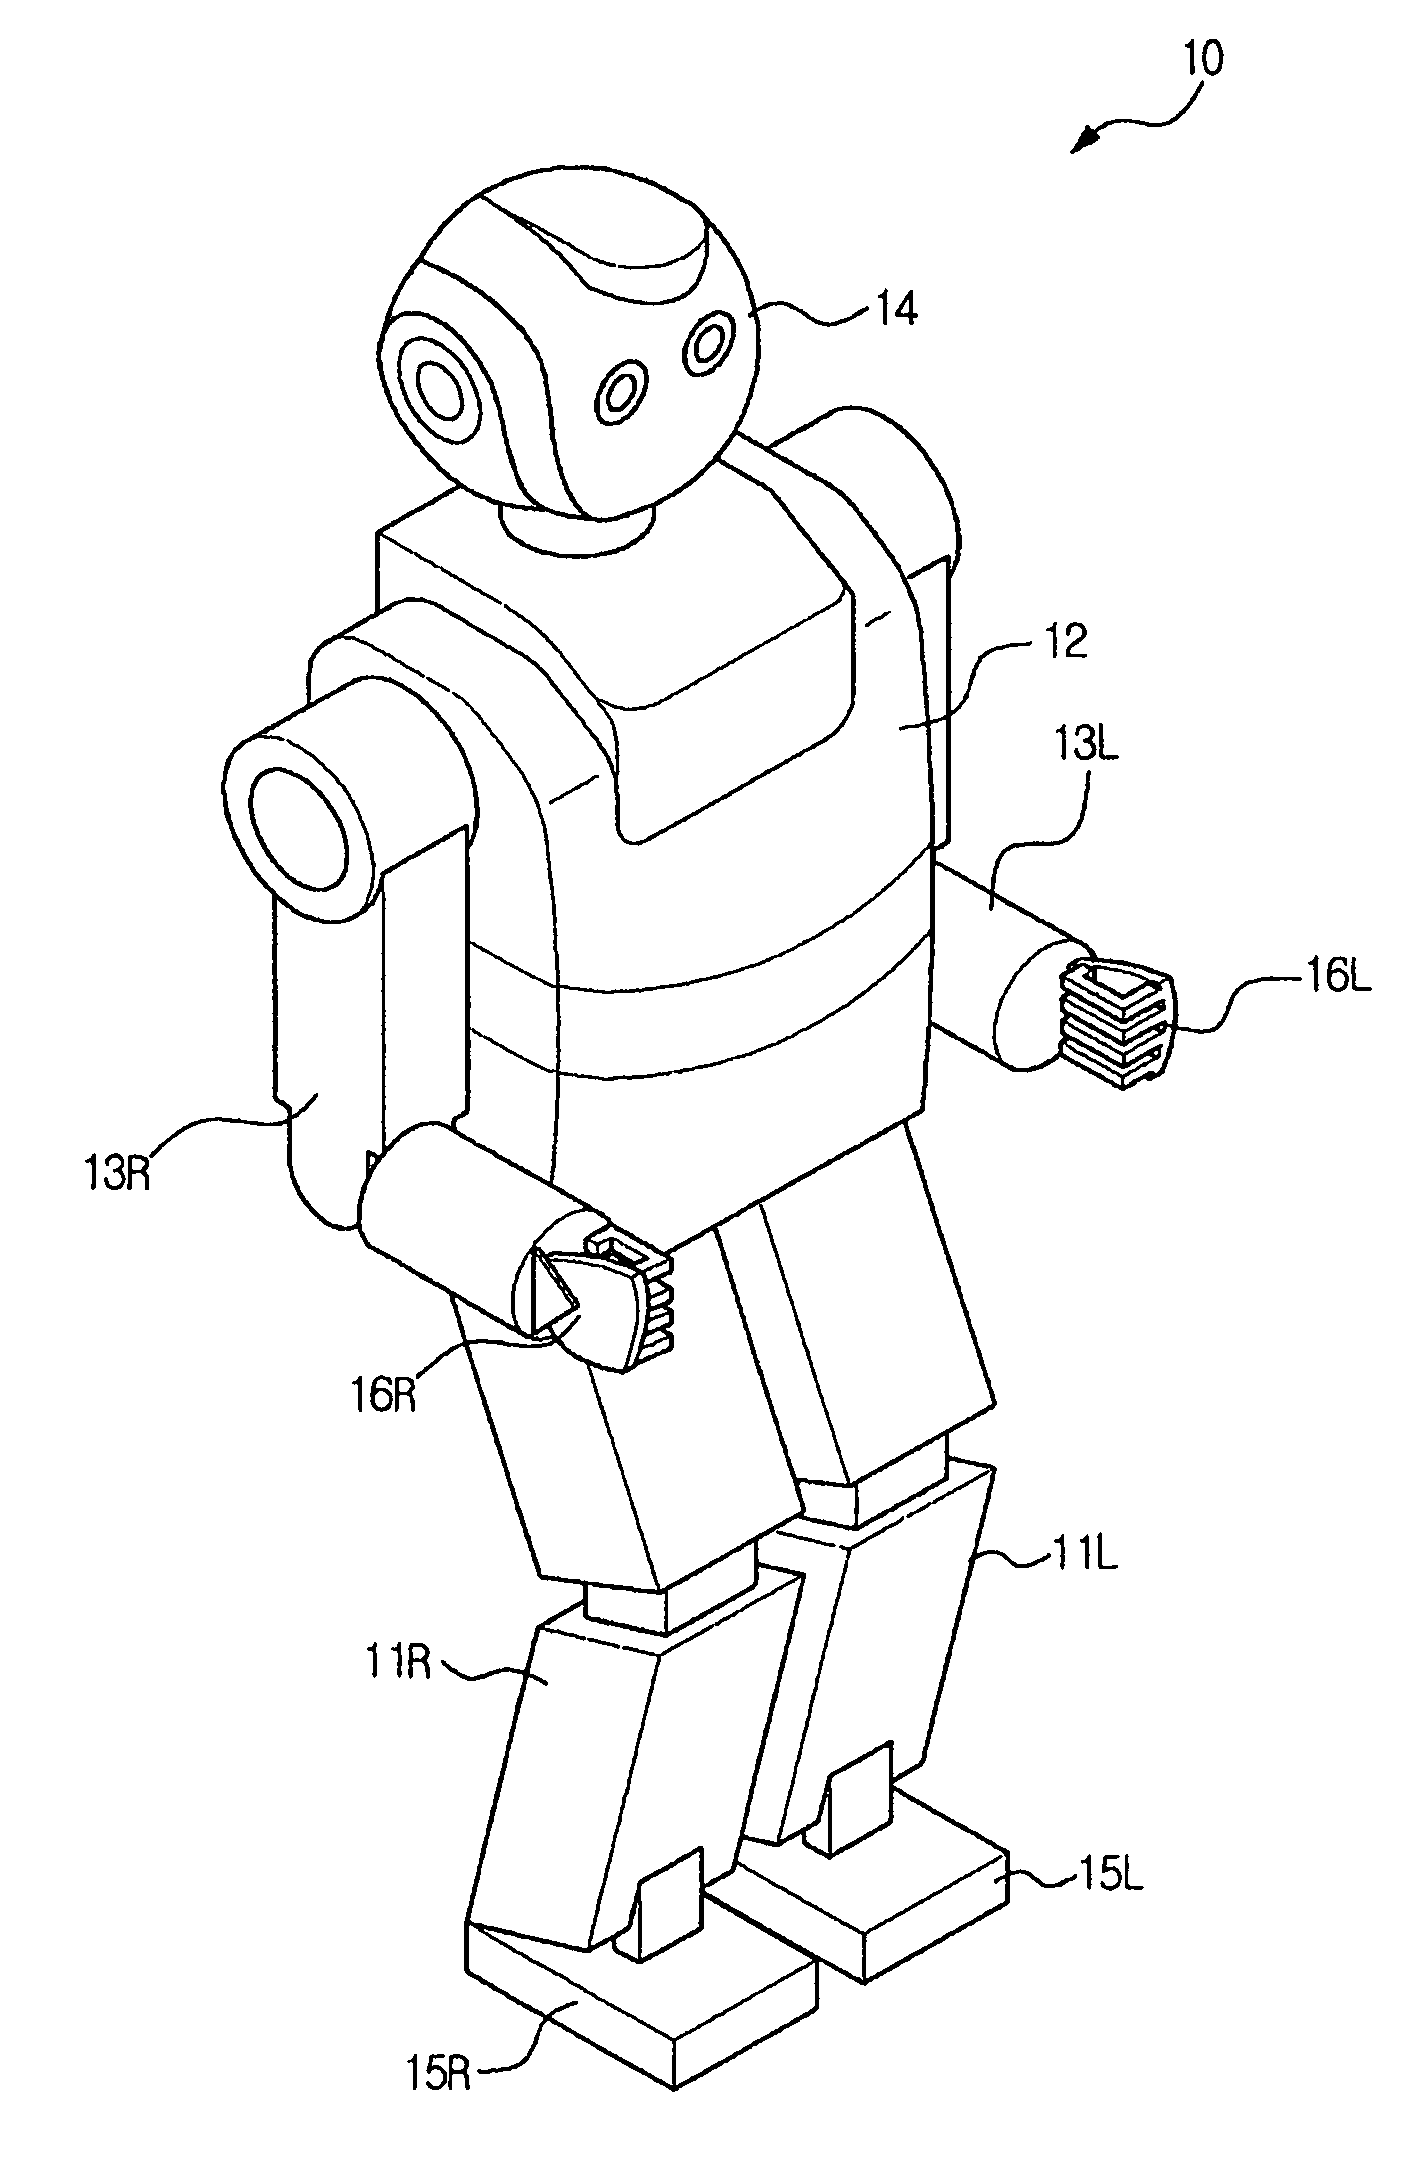 Robot and method of controlling walking thereof